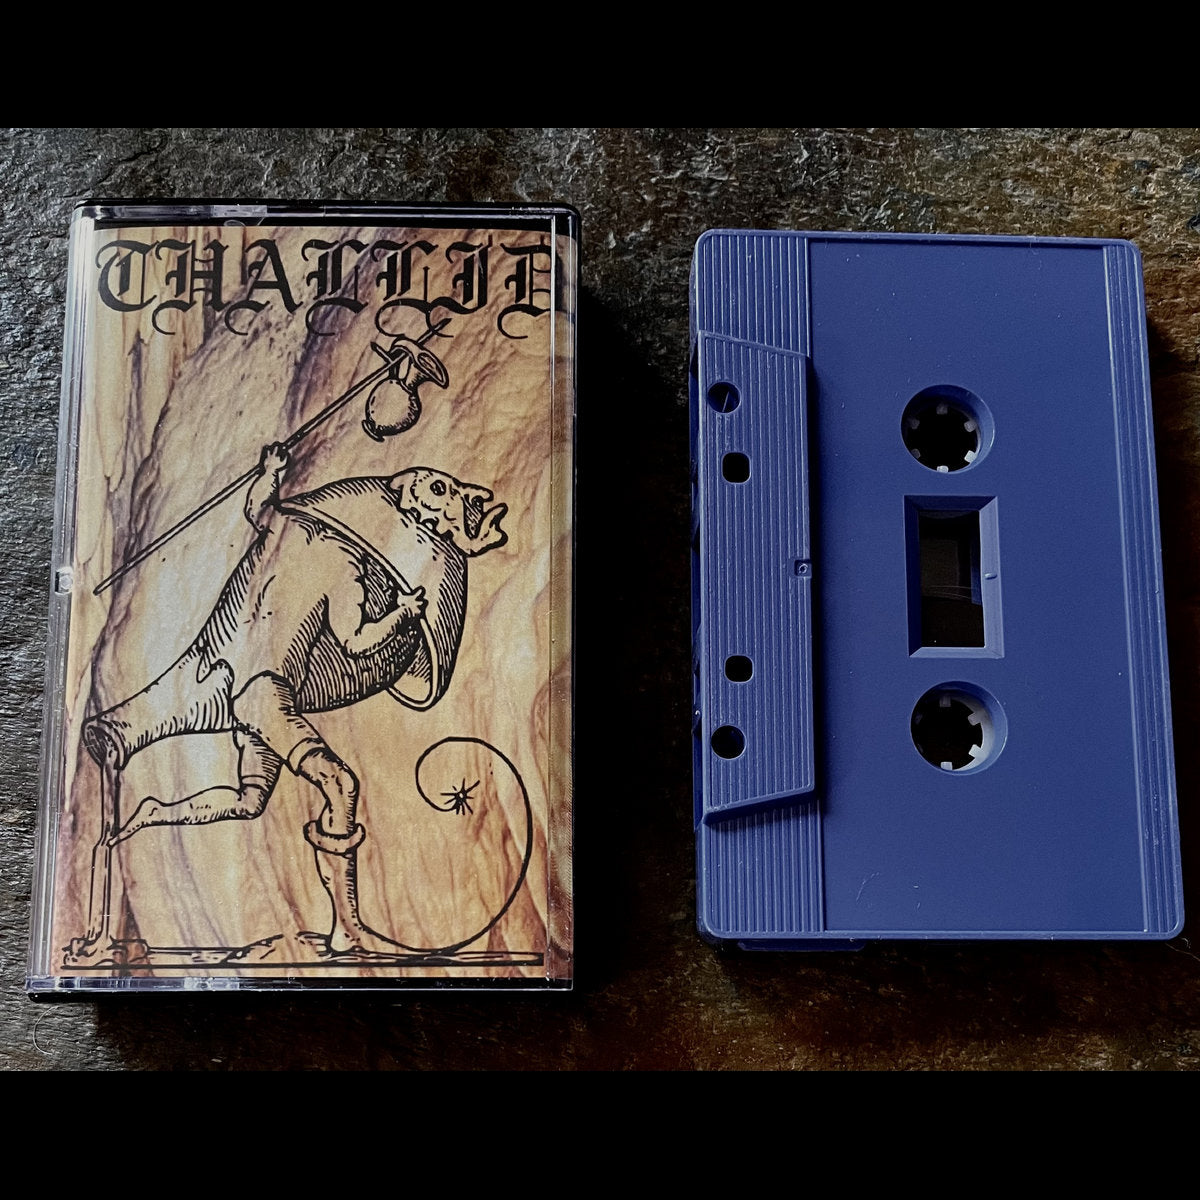 [SOLD OUT] THALLID "Agonized Illumination" cassette tape (lim.100)